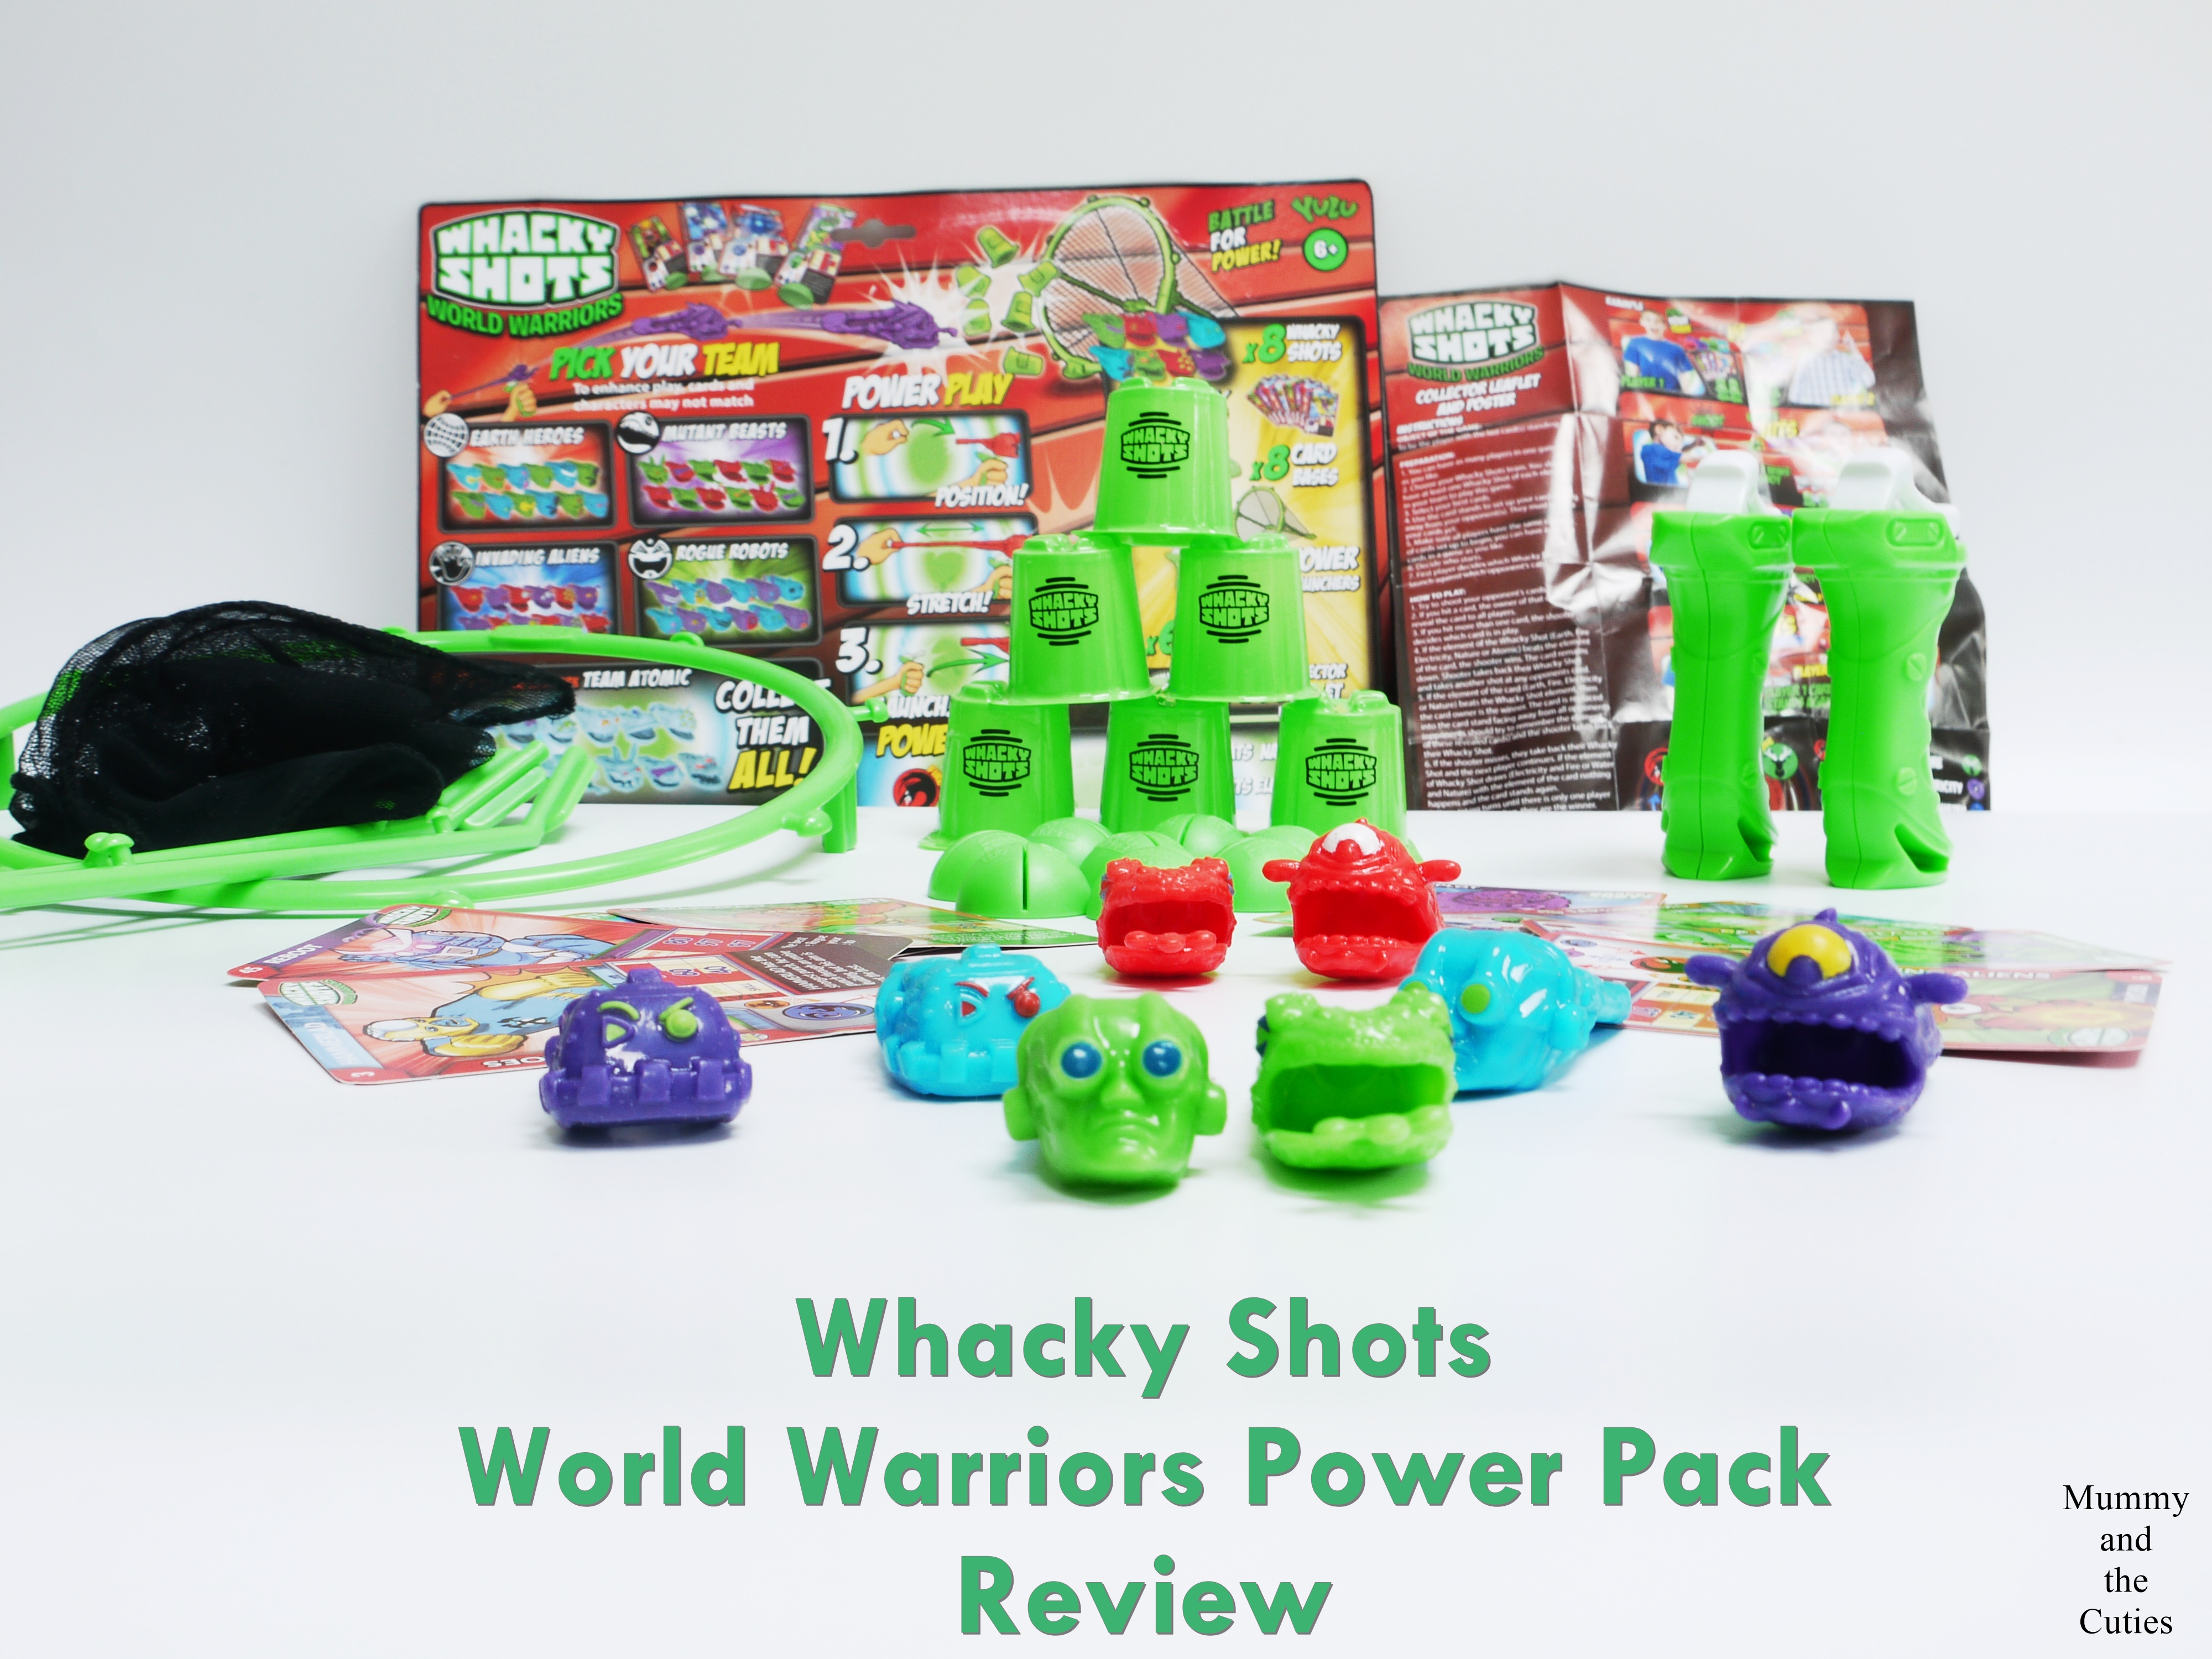 Review – Whacky Shots World Warriors Power Pack